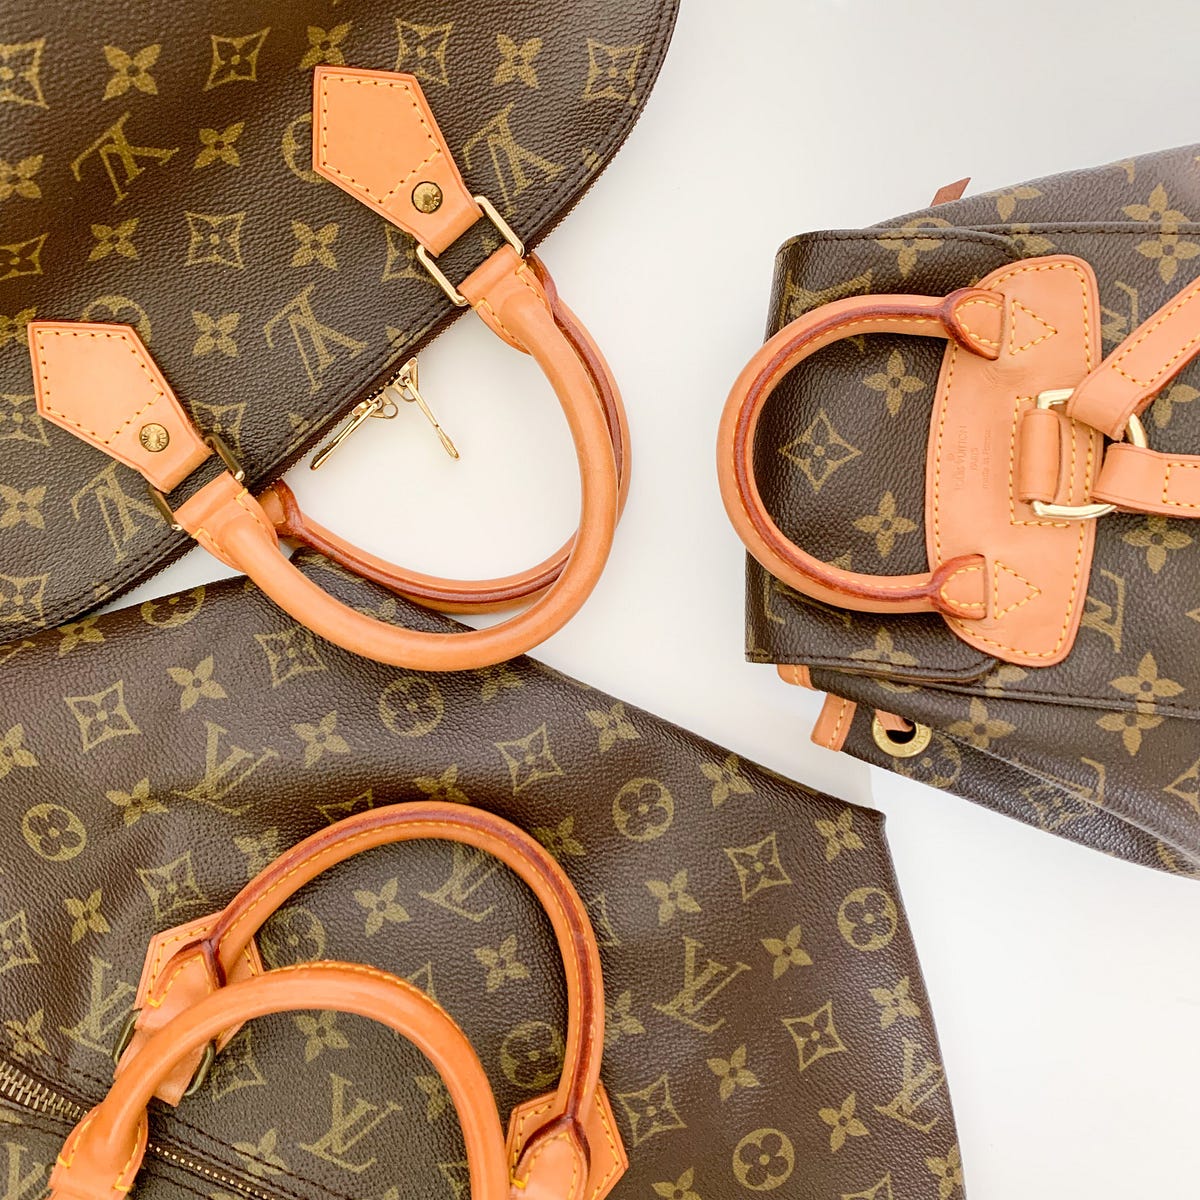 WHY I'M NOT BUYING THE NEW LOUIS VUITTON NANO SPEEDY & WHY THE ORIGINAL  NANO SPEEDY IS BETTER 